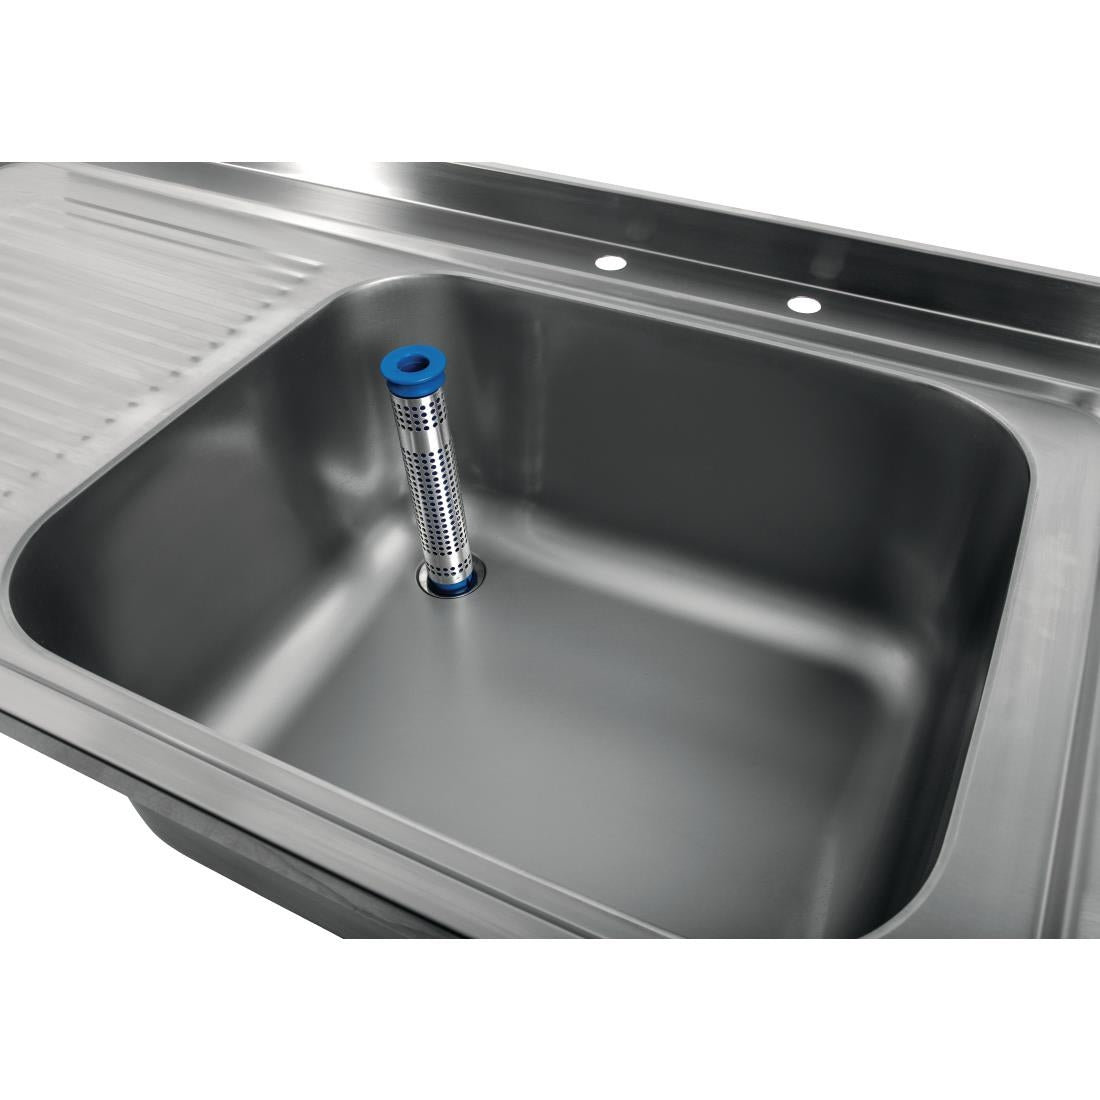 DR381 Holmes Fully Assembled Stainless Steel Sink Left Hand Drainer 1200mm JD Catering Equipment Solutions Ltd